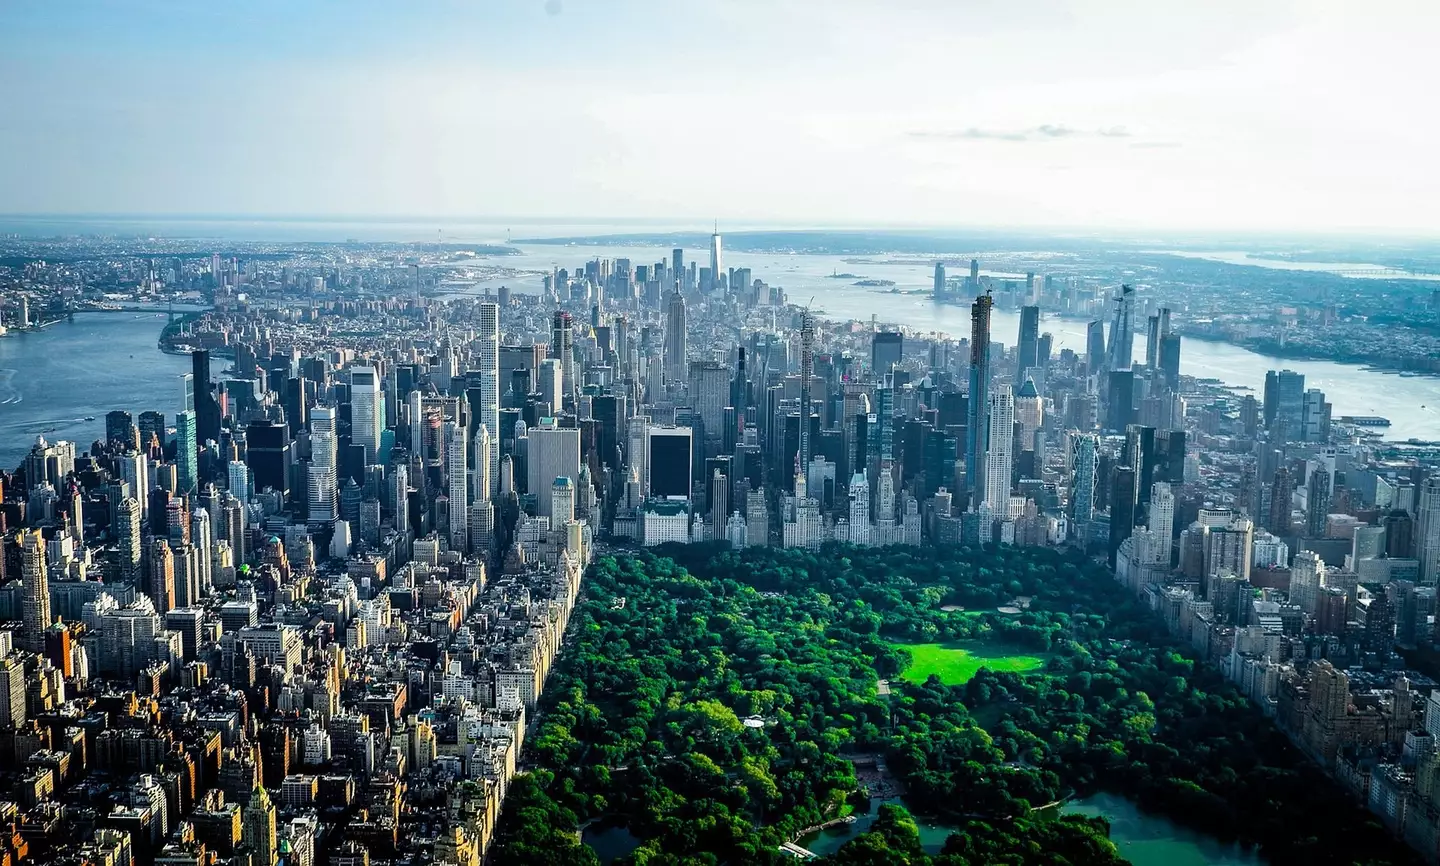 The airline is offering return flights to New York for just £255.